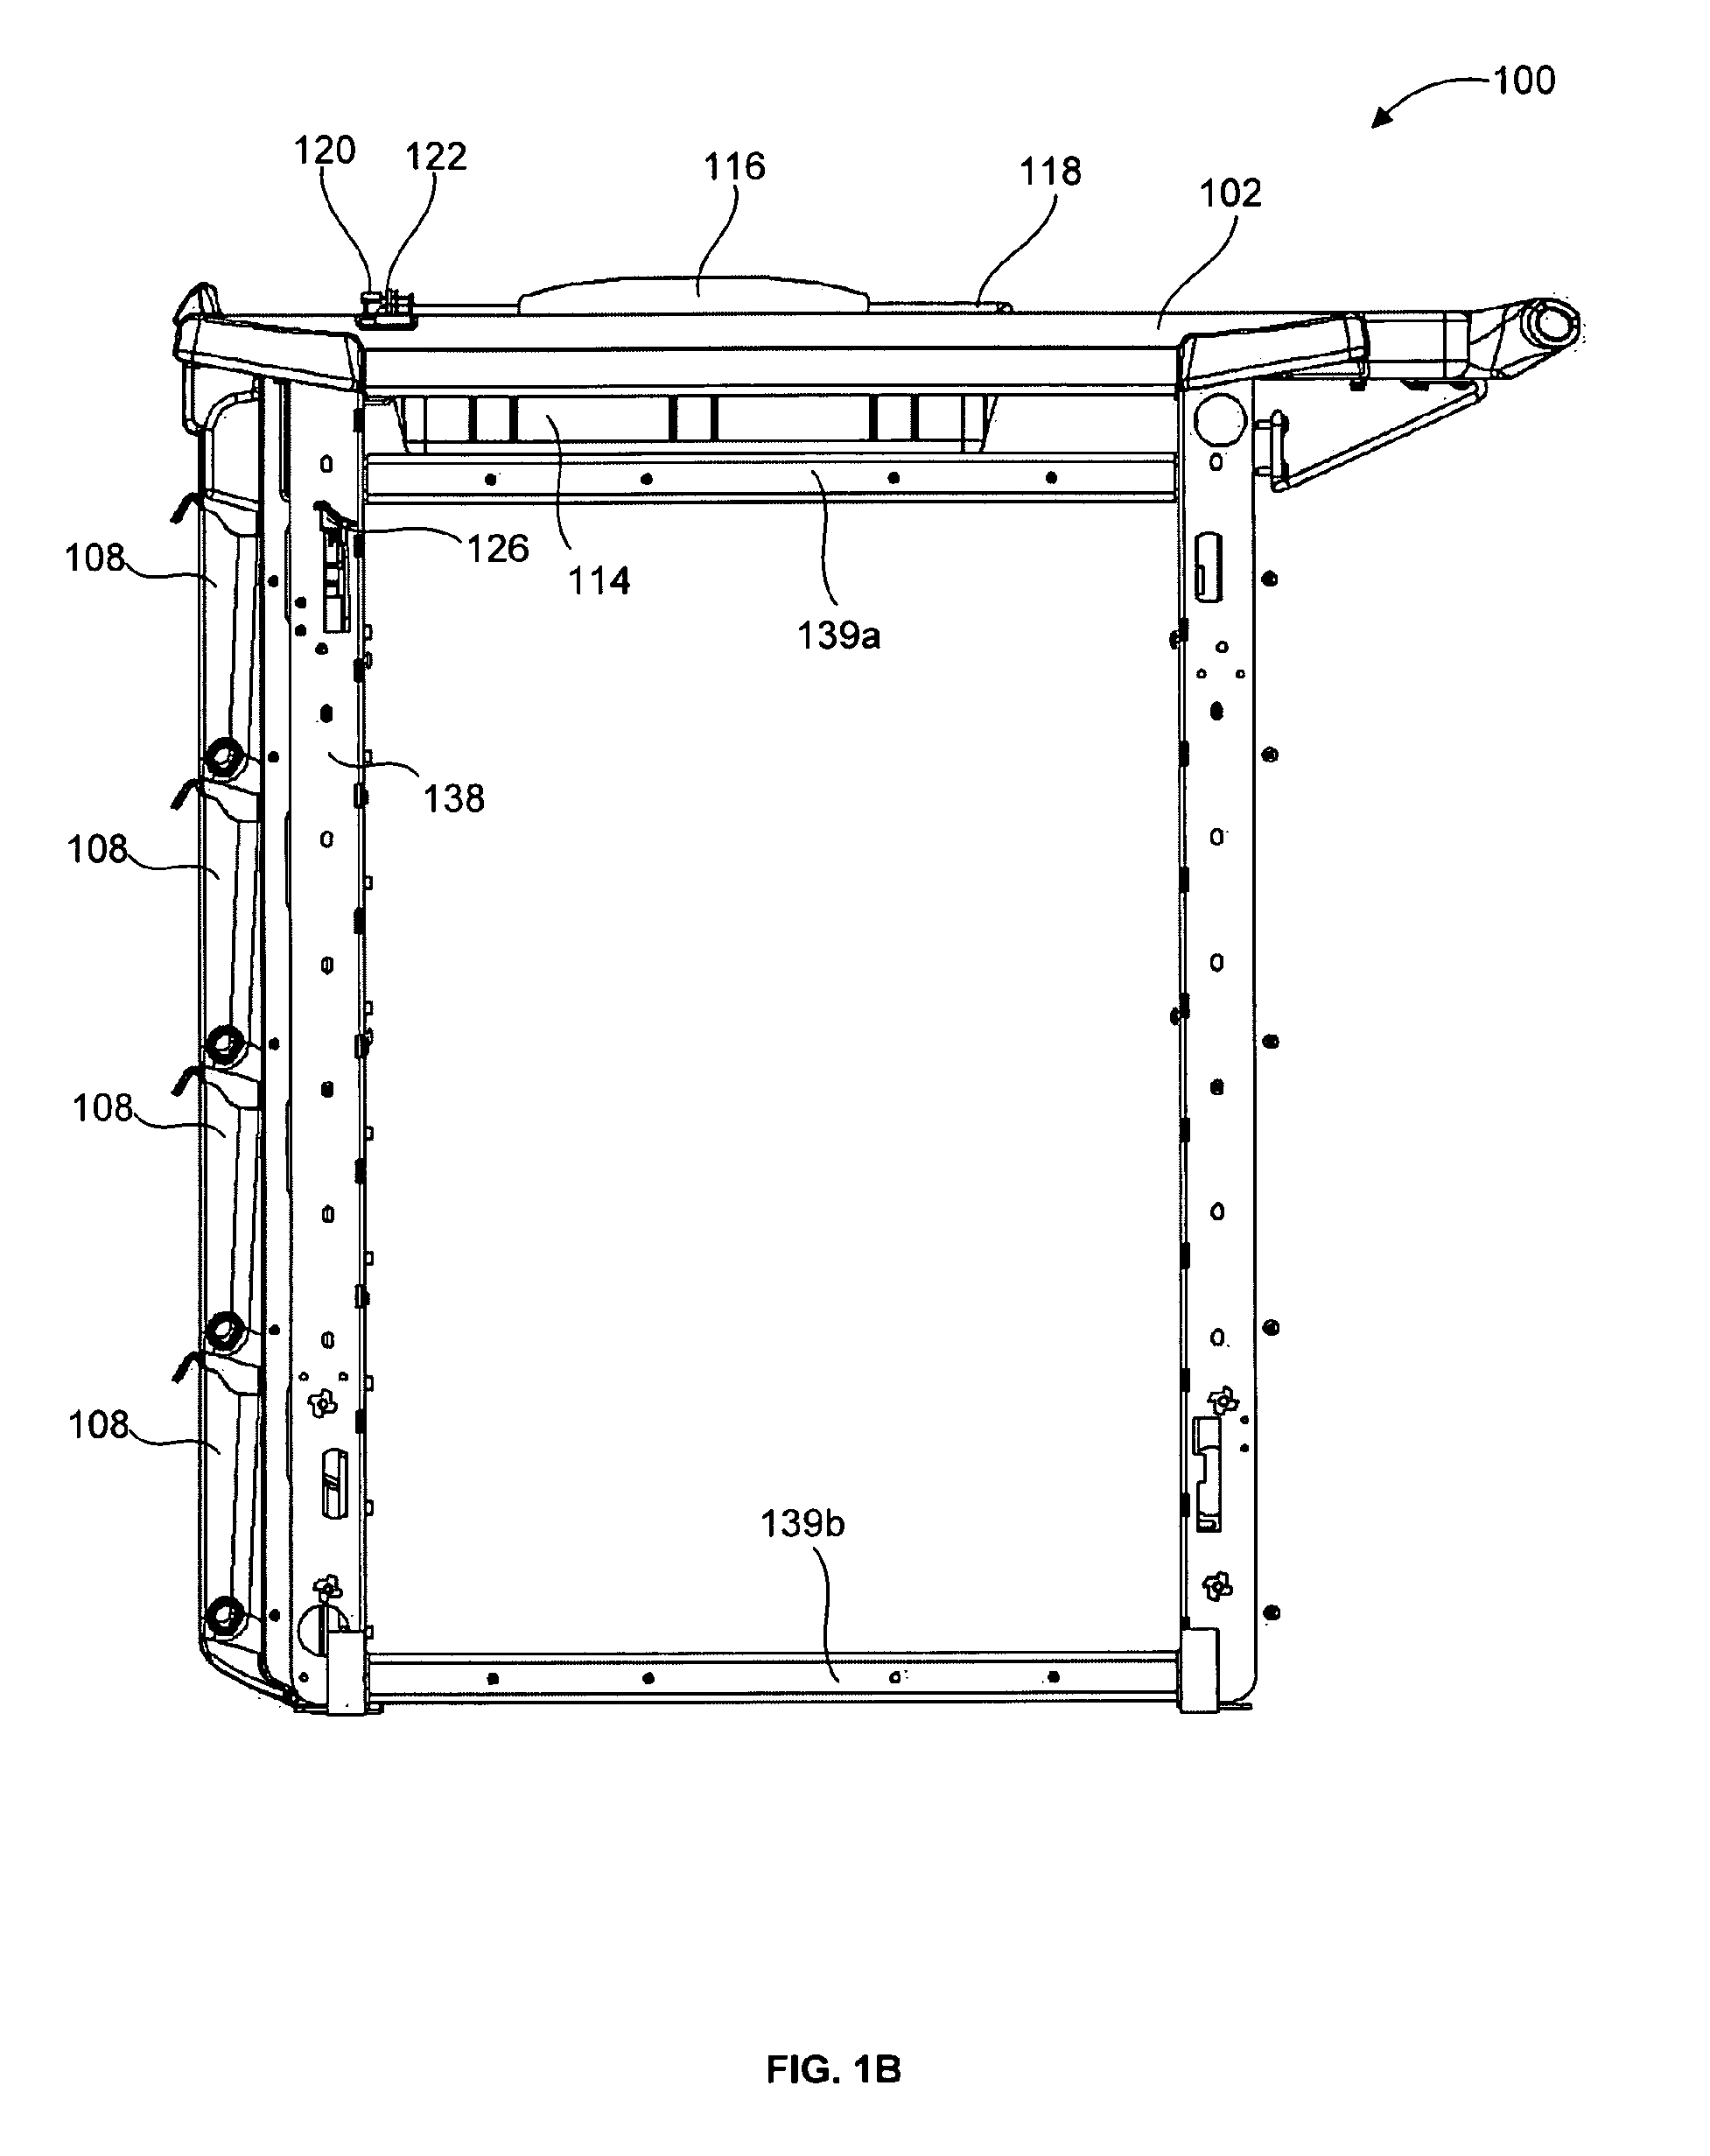 Sealing structure for sealing multiple sections and a drawer of a medical emergency cart